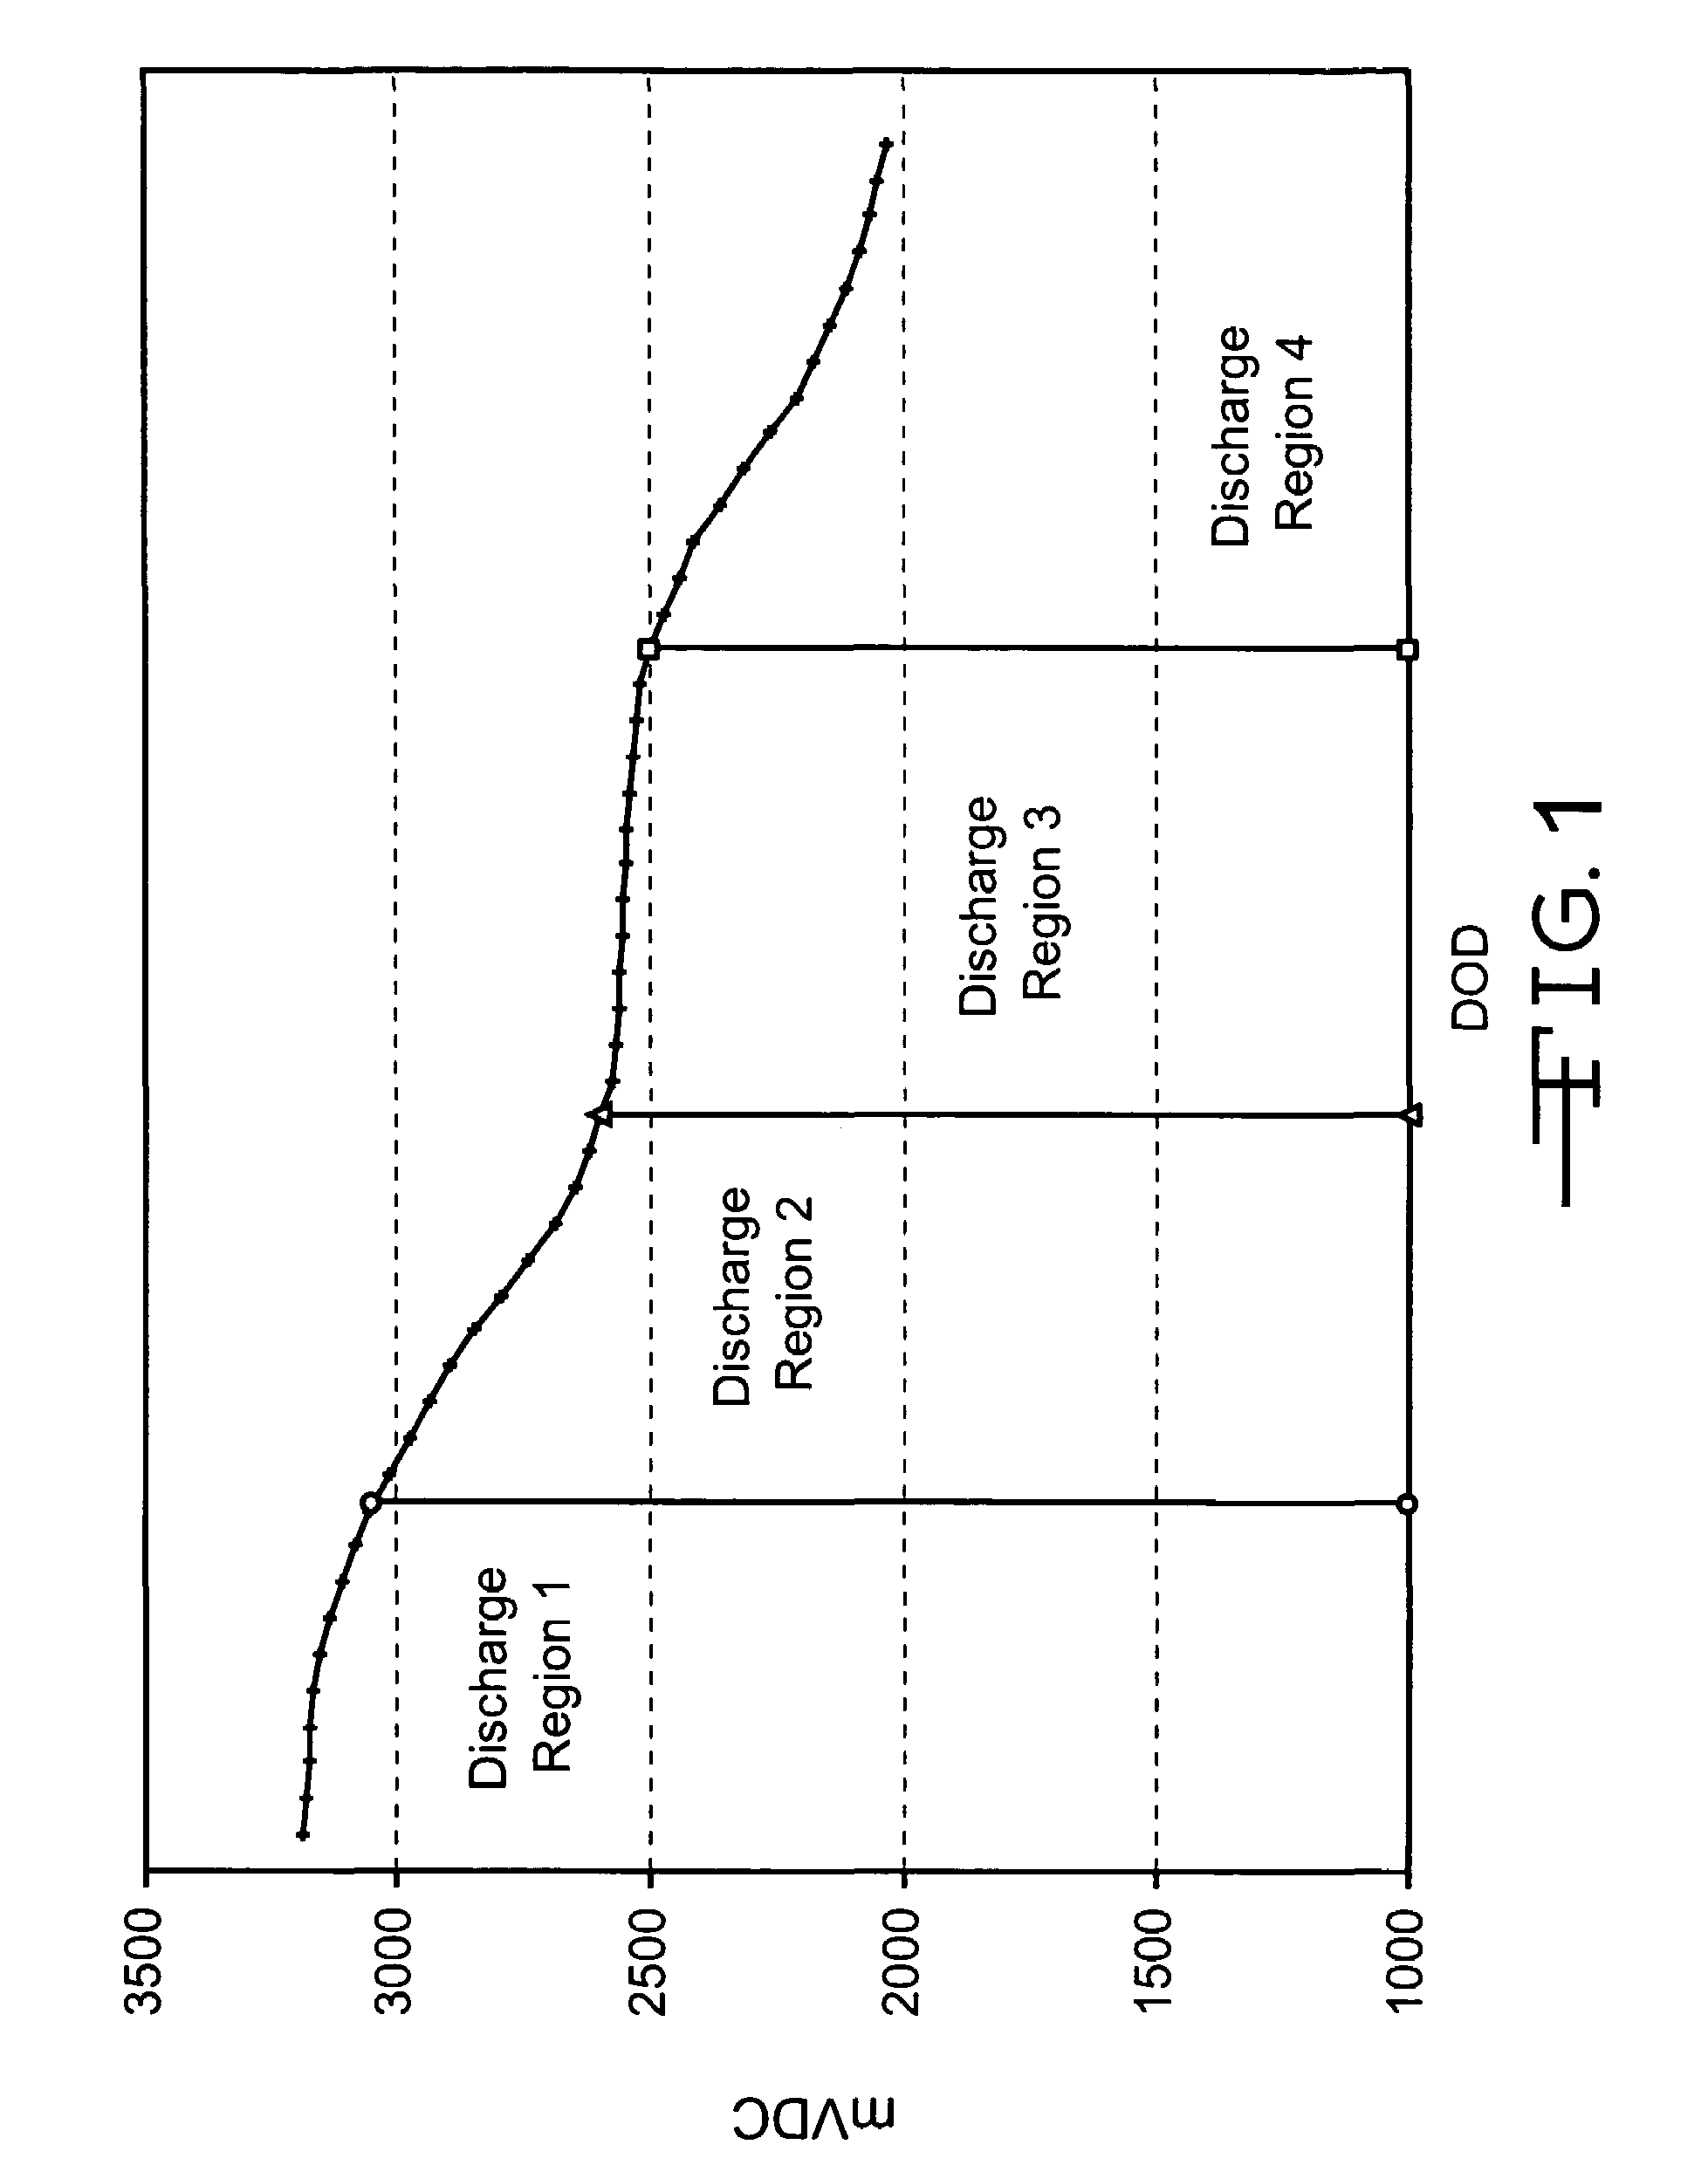 Methods to improve efficiency of lithium/silver vanadium oxide cell discharge energy in implantable medical device applications